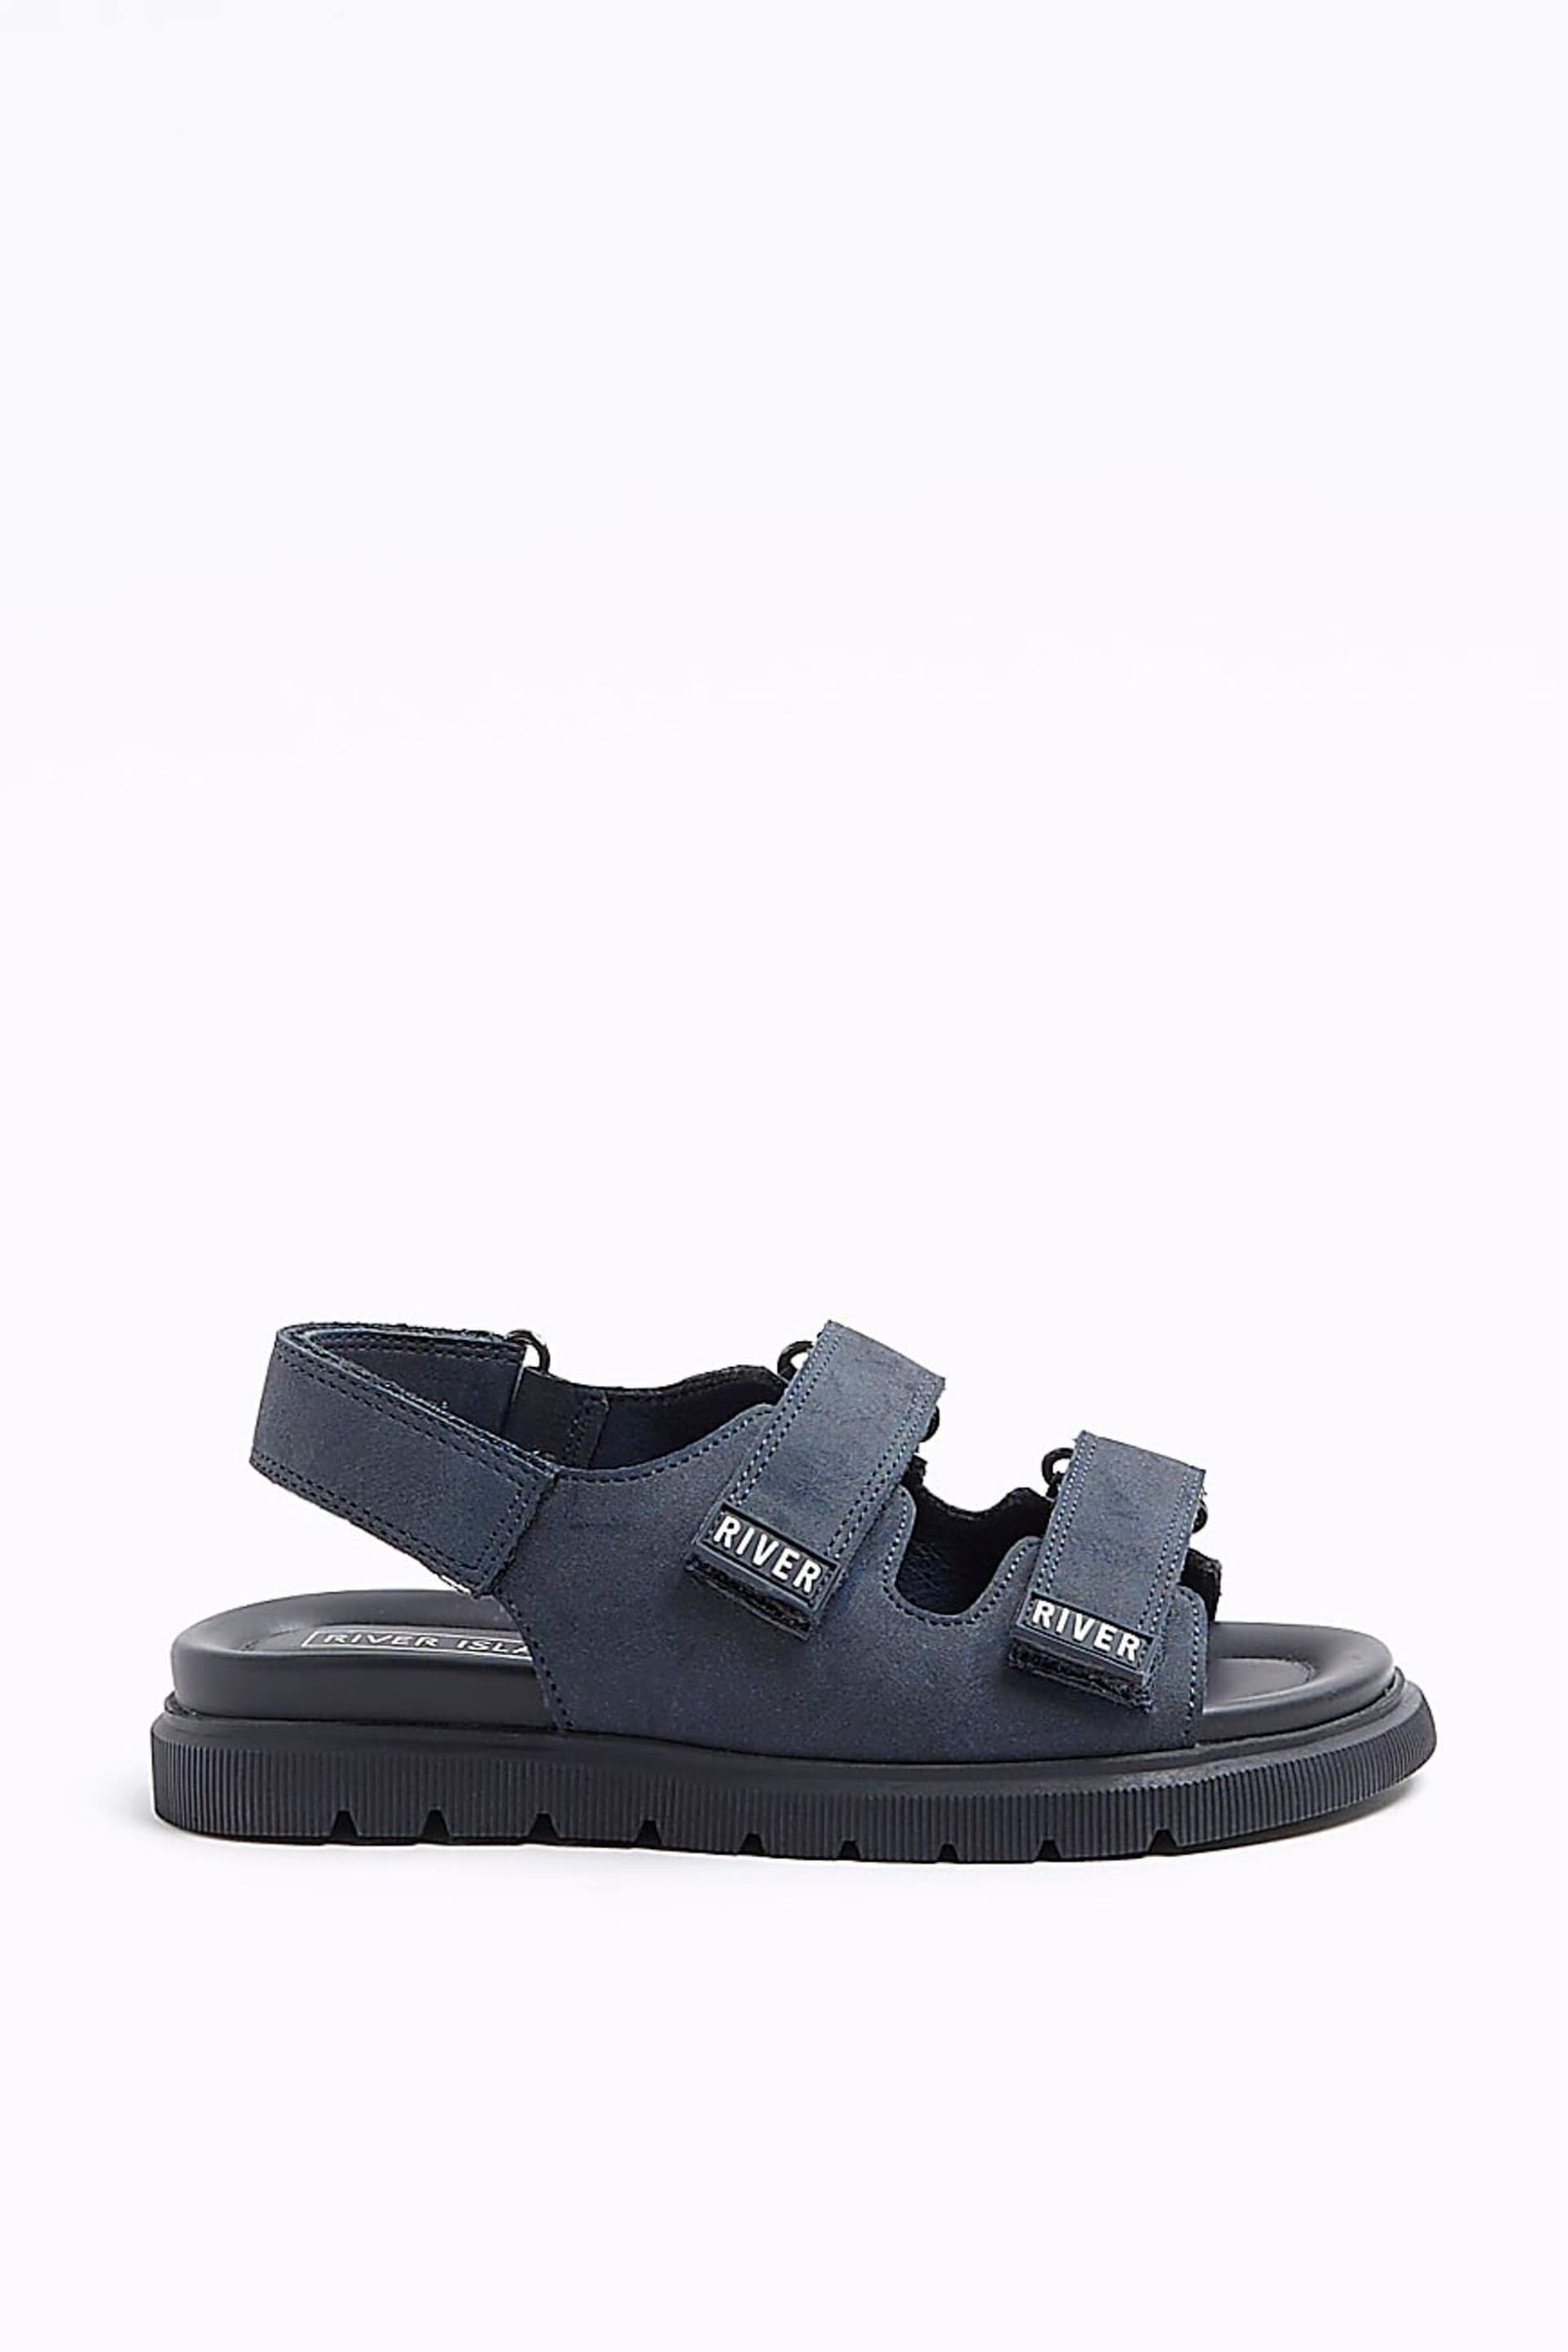 River Island Blue Boys Double Strap Sandals - Image 1 of 5